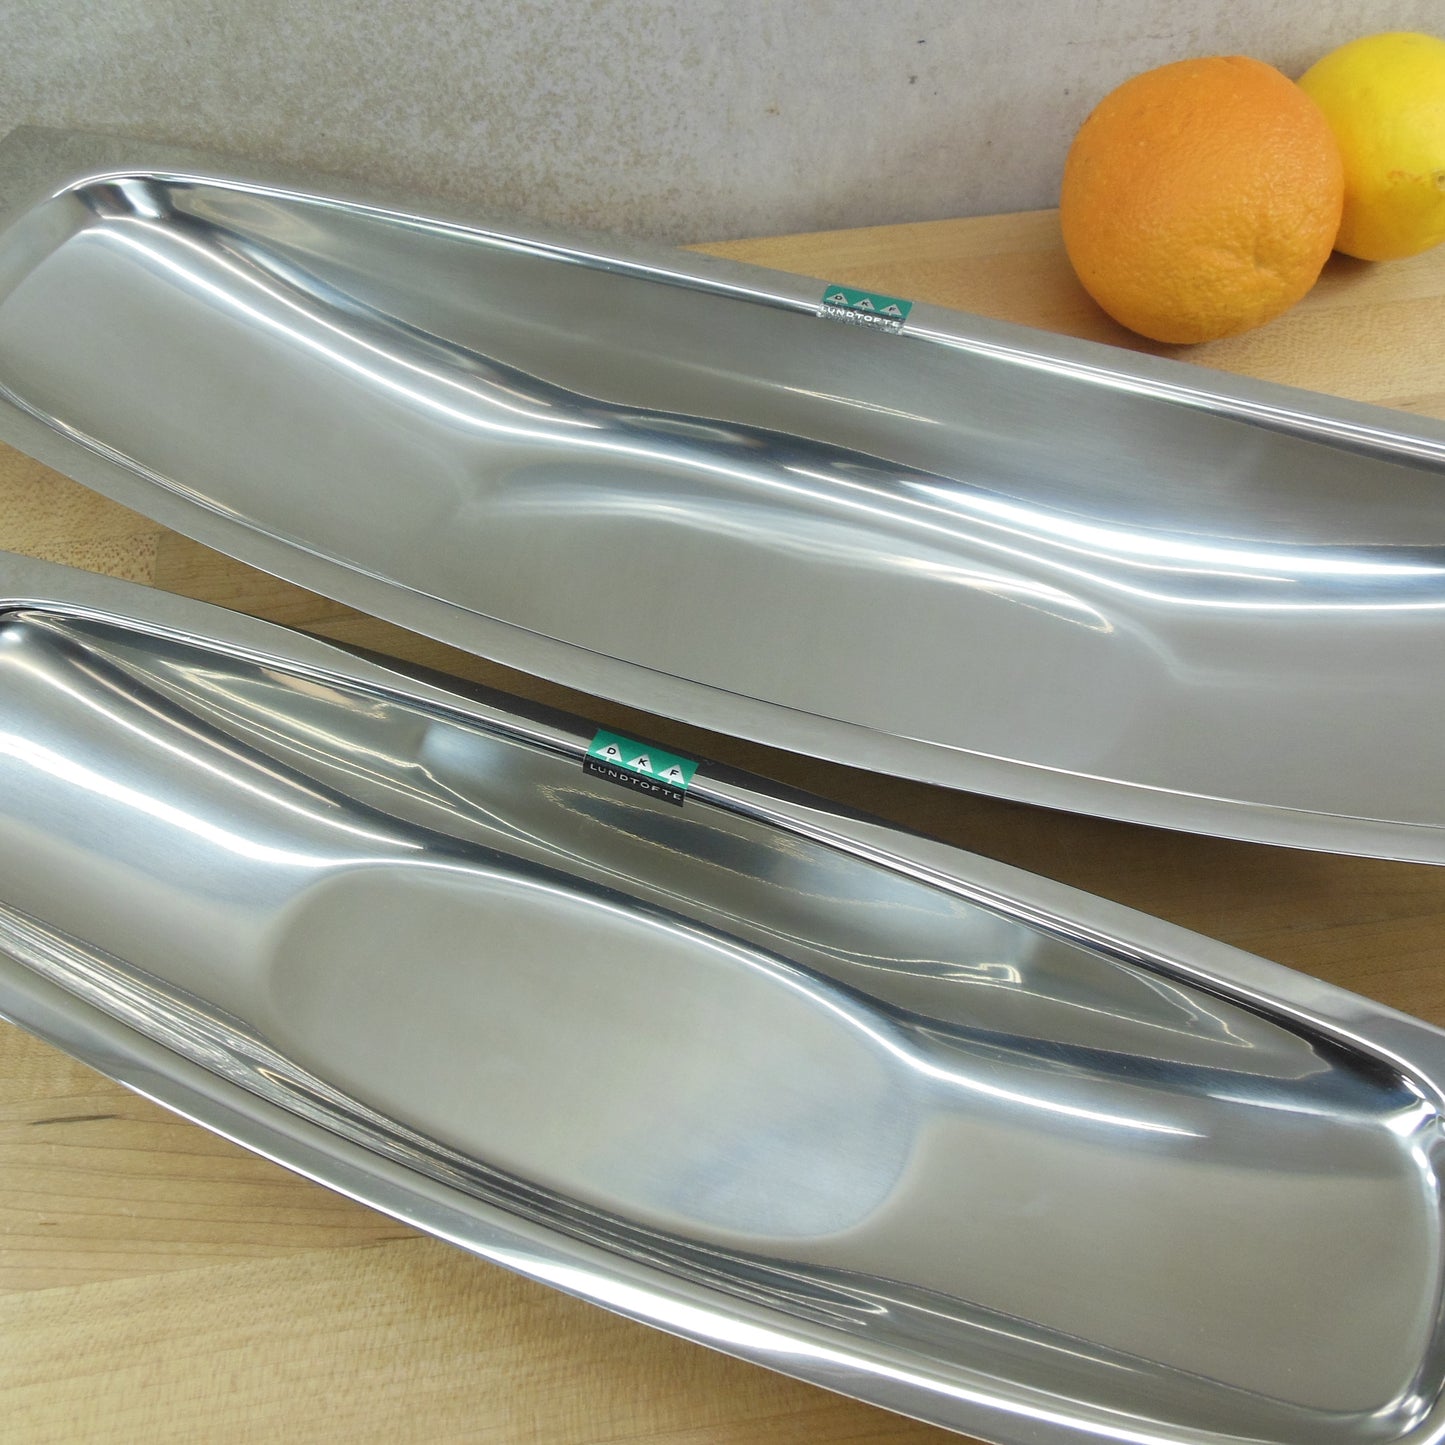 DKF Lundtofte Denmark Stainless Pair Long Serving Bowls NOS Vintage MCM